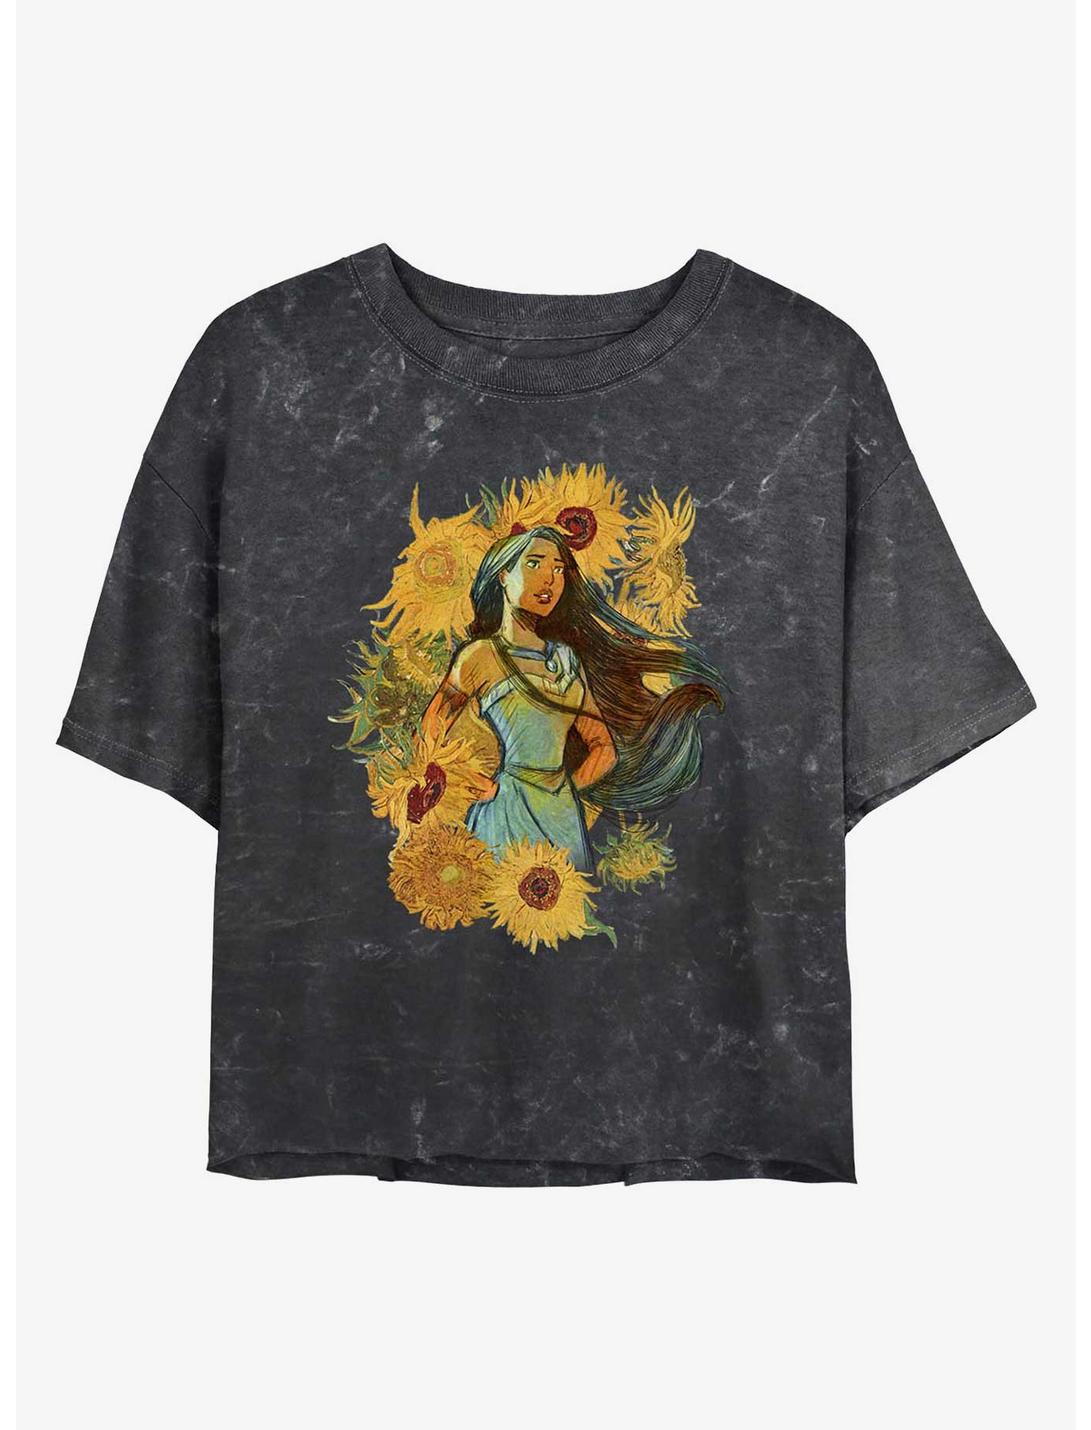 Disney Pocahontas Sunflowers In The Wind Mineral Wash Womens Crop T-Shirt, BLACK, hi-res